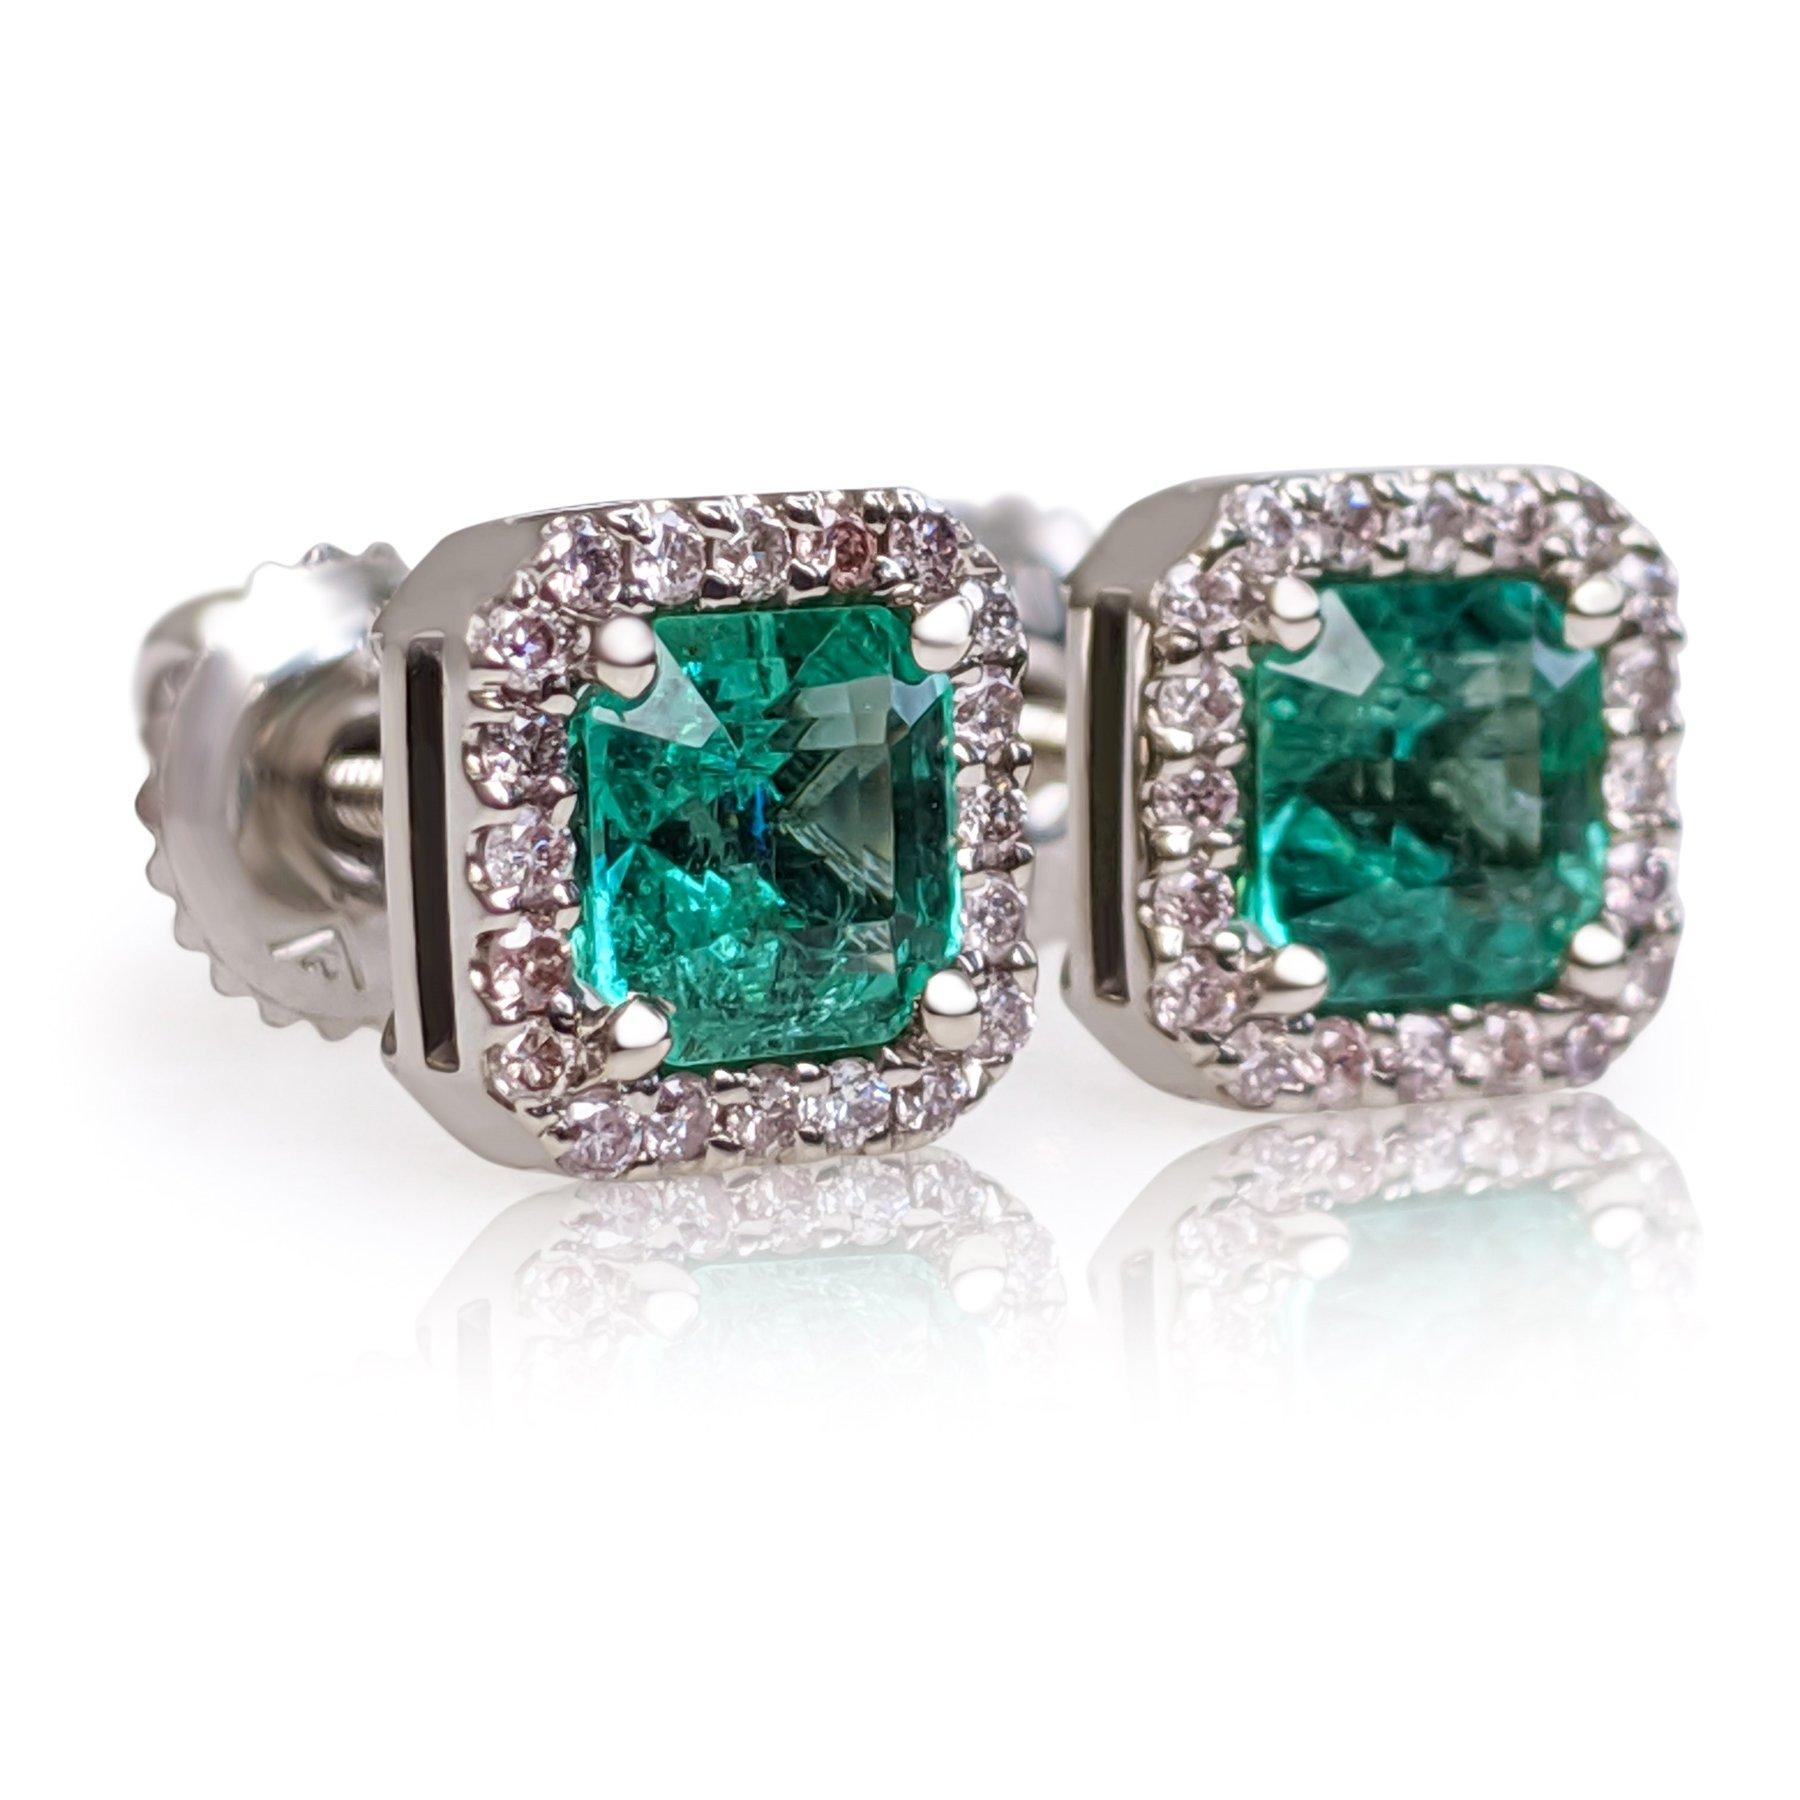 Square Cut NO RESERVE! 1.26Ct Emerald & 0.20Ct Diamonds - 14 kt. White gold - Earrings